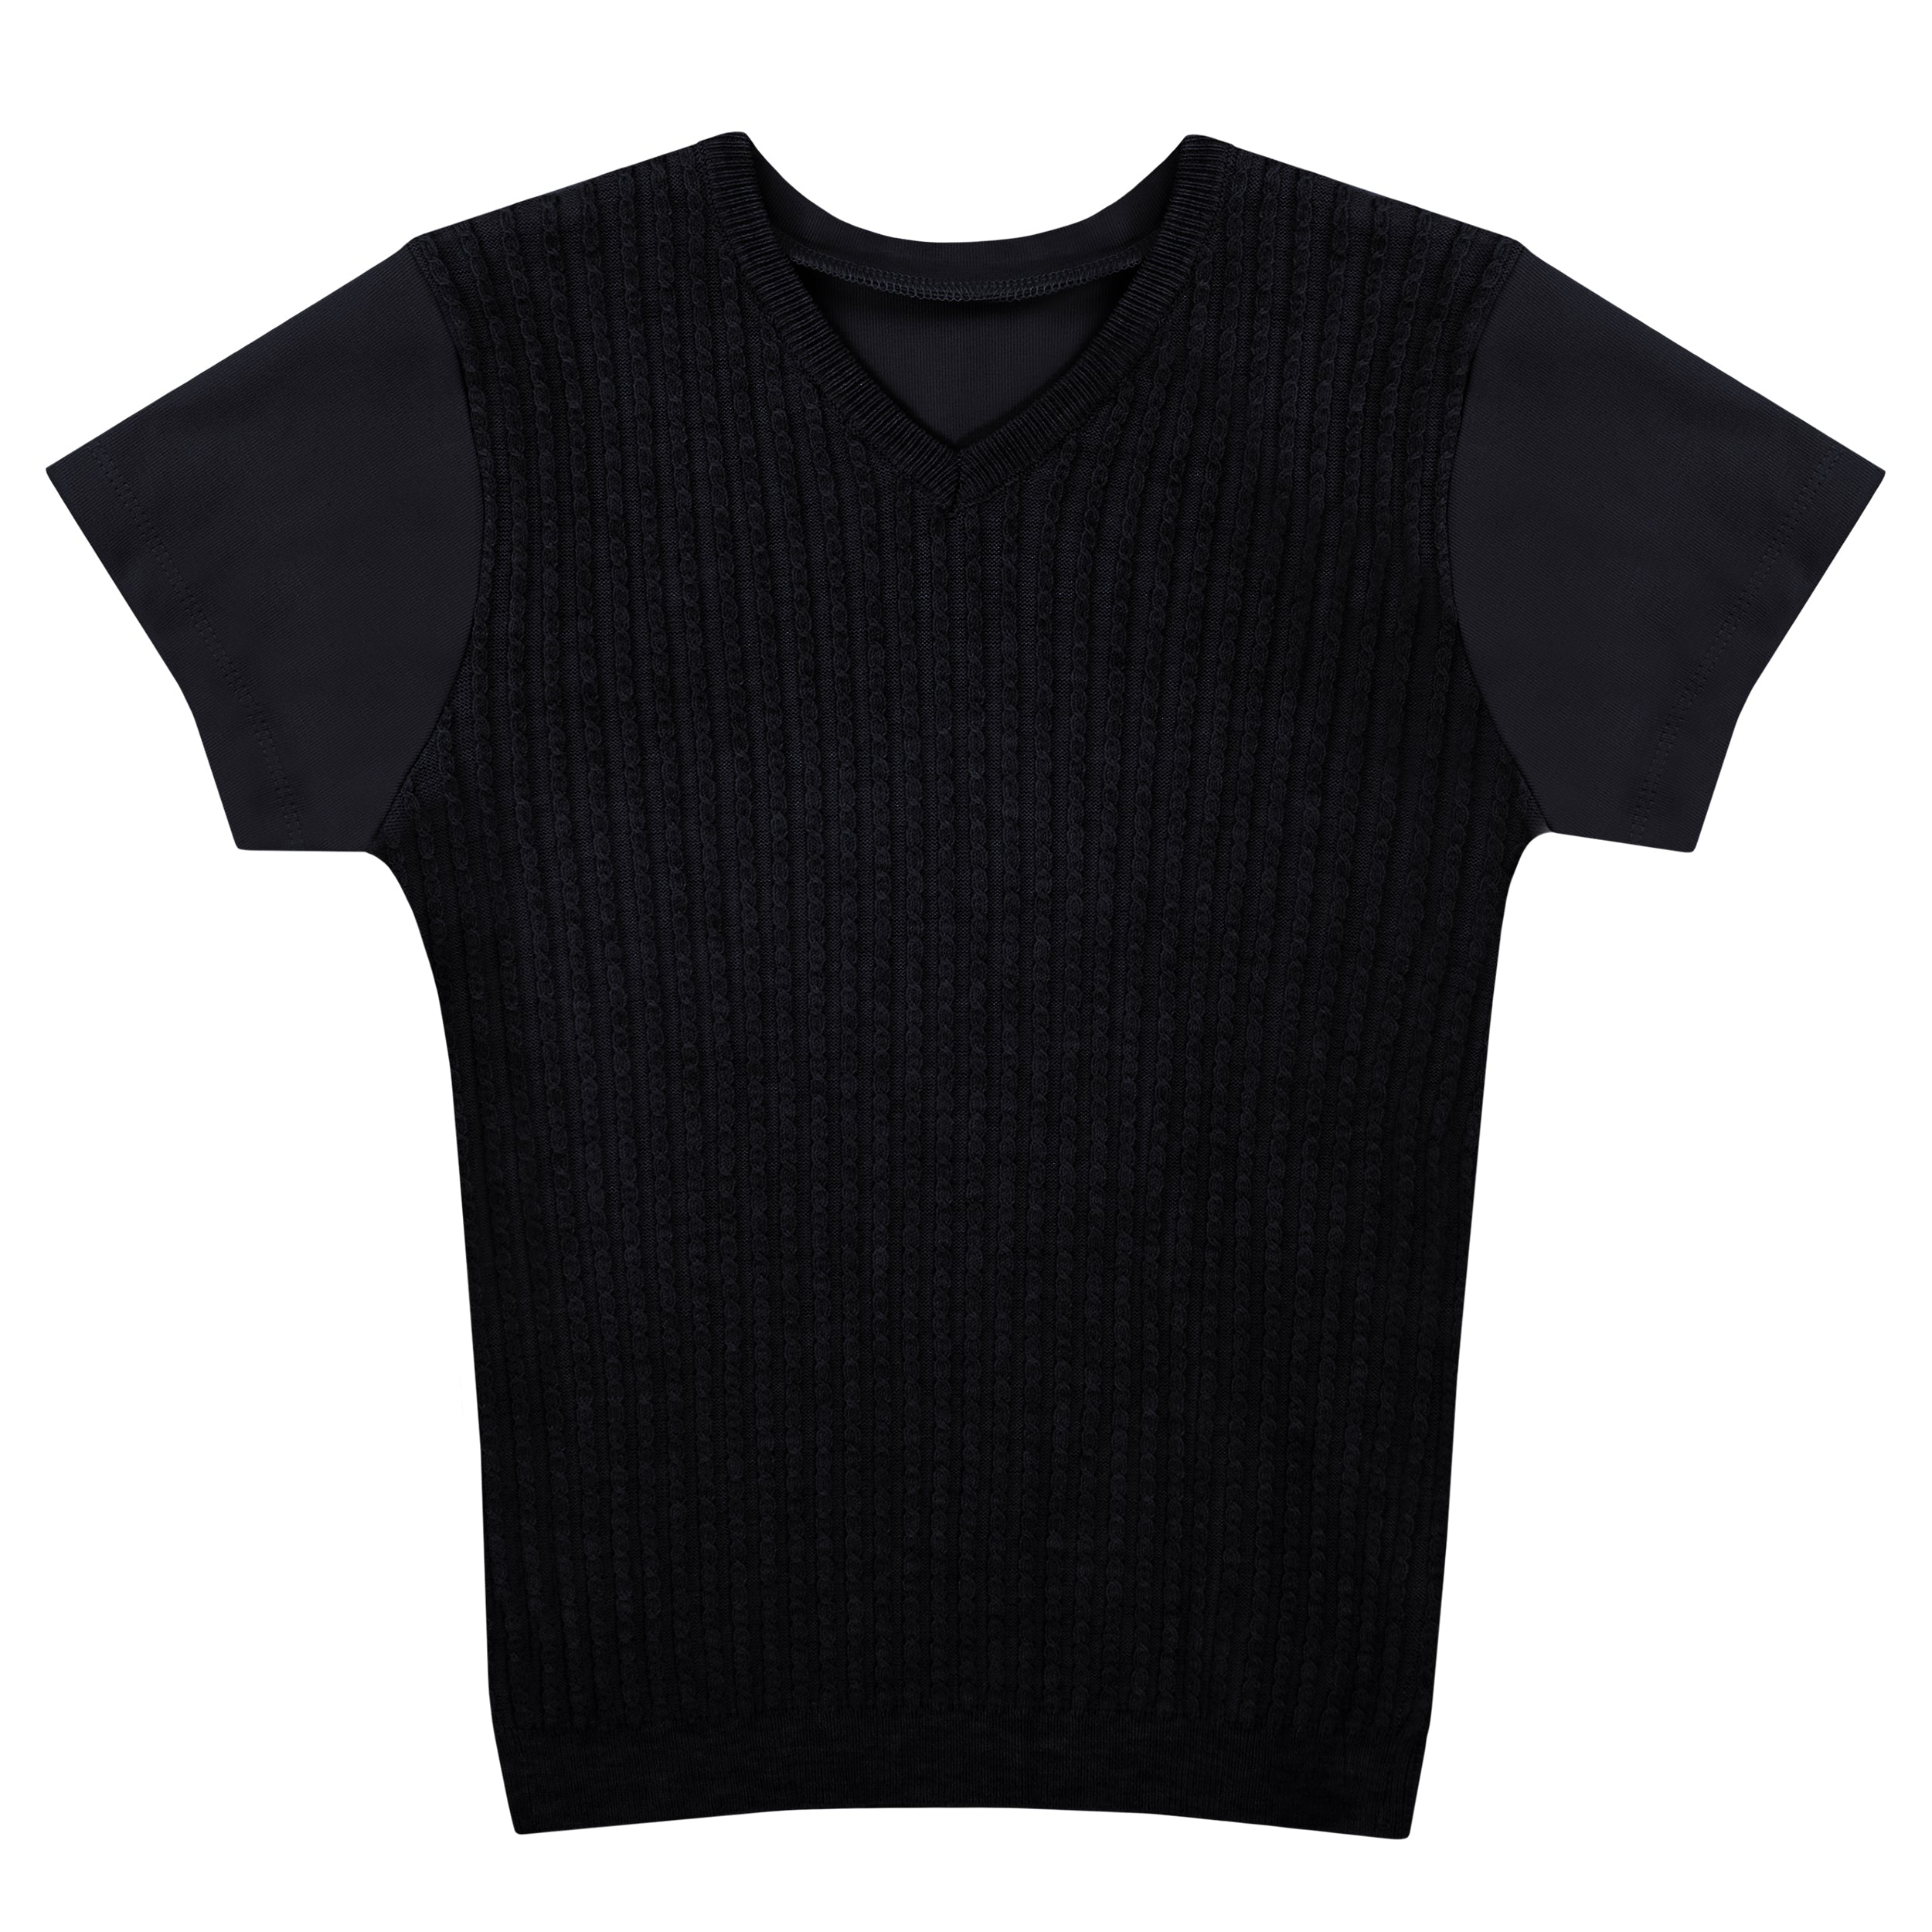 Crew Kids Cable Tshirt Sweater - Black